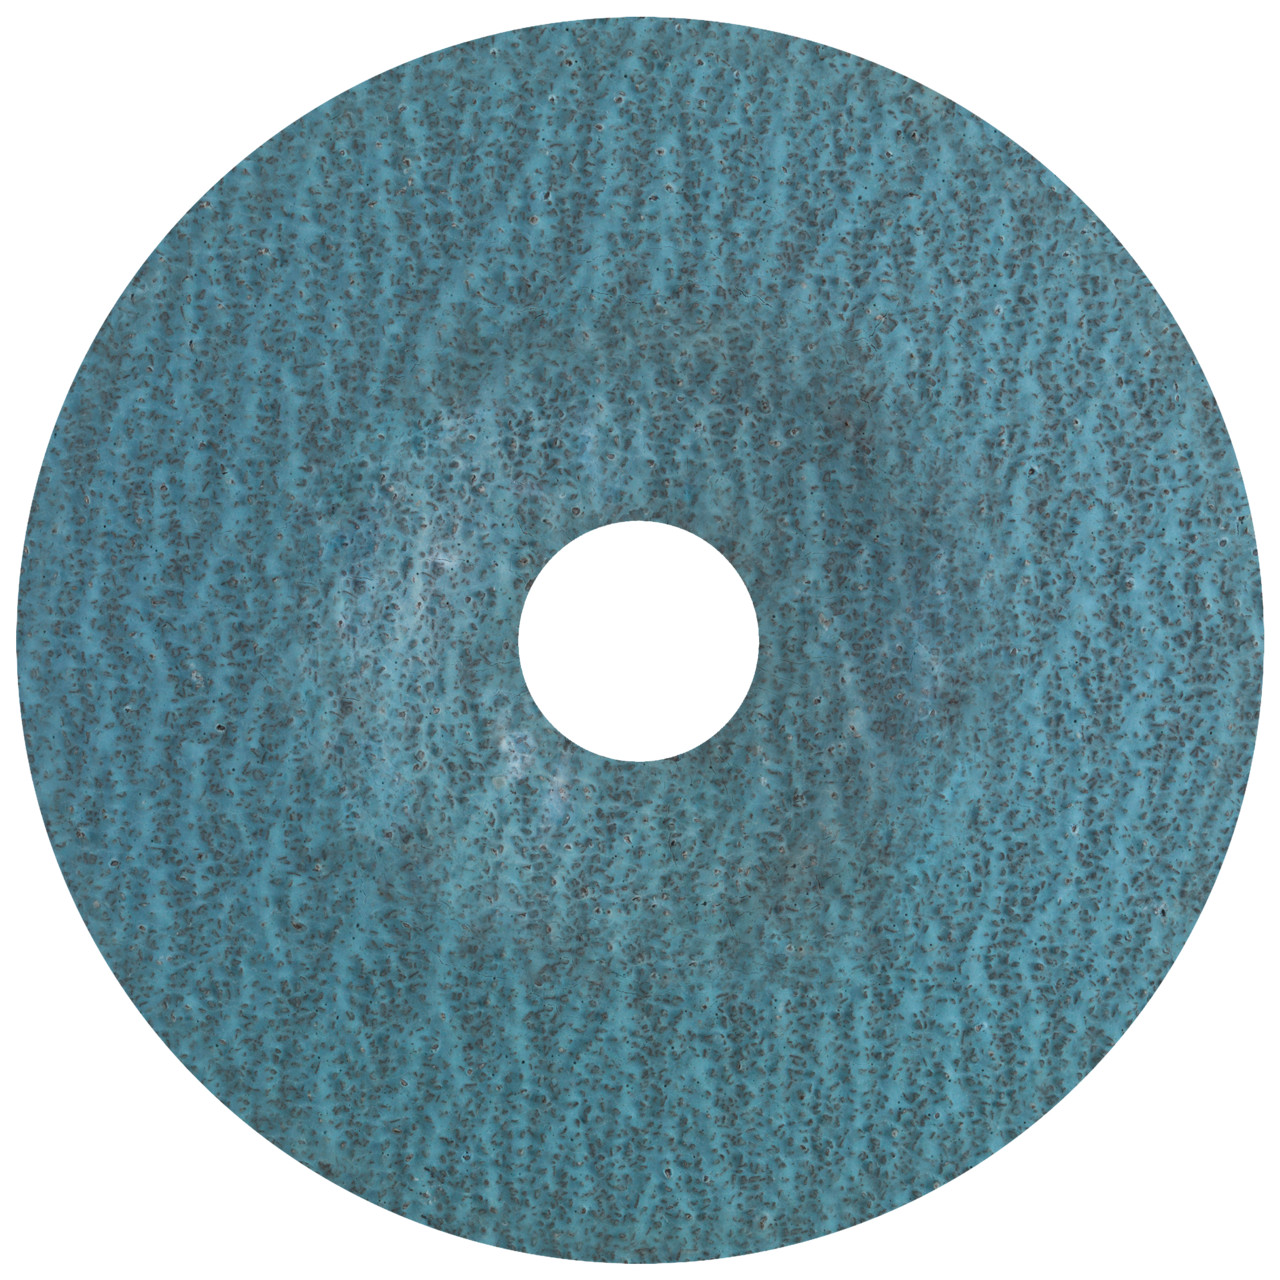 Tyrolit ZA-P48 N NATURAL FIBRE DISC DxH 125x22 For steel and stainless steel, P60, form: DISC, Art. 205058